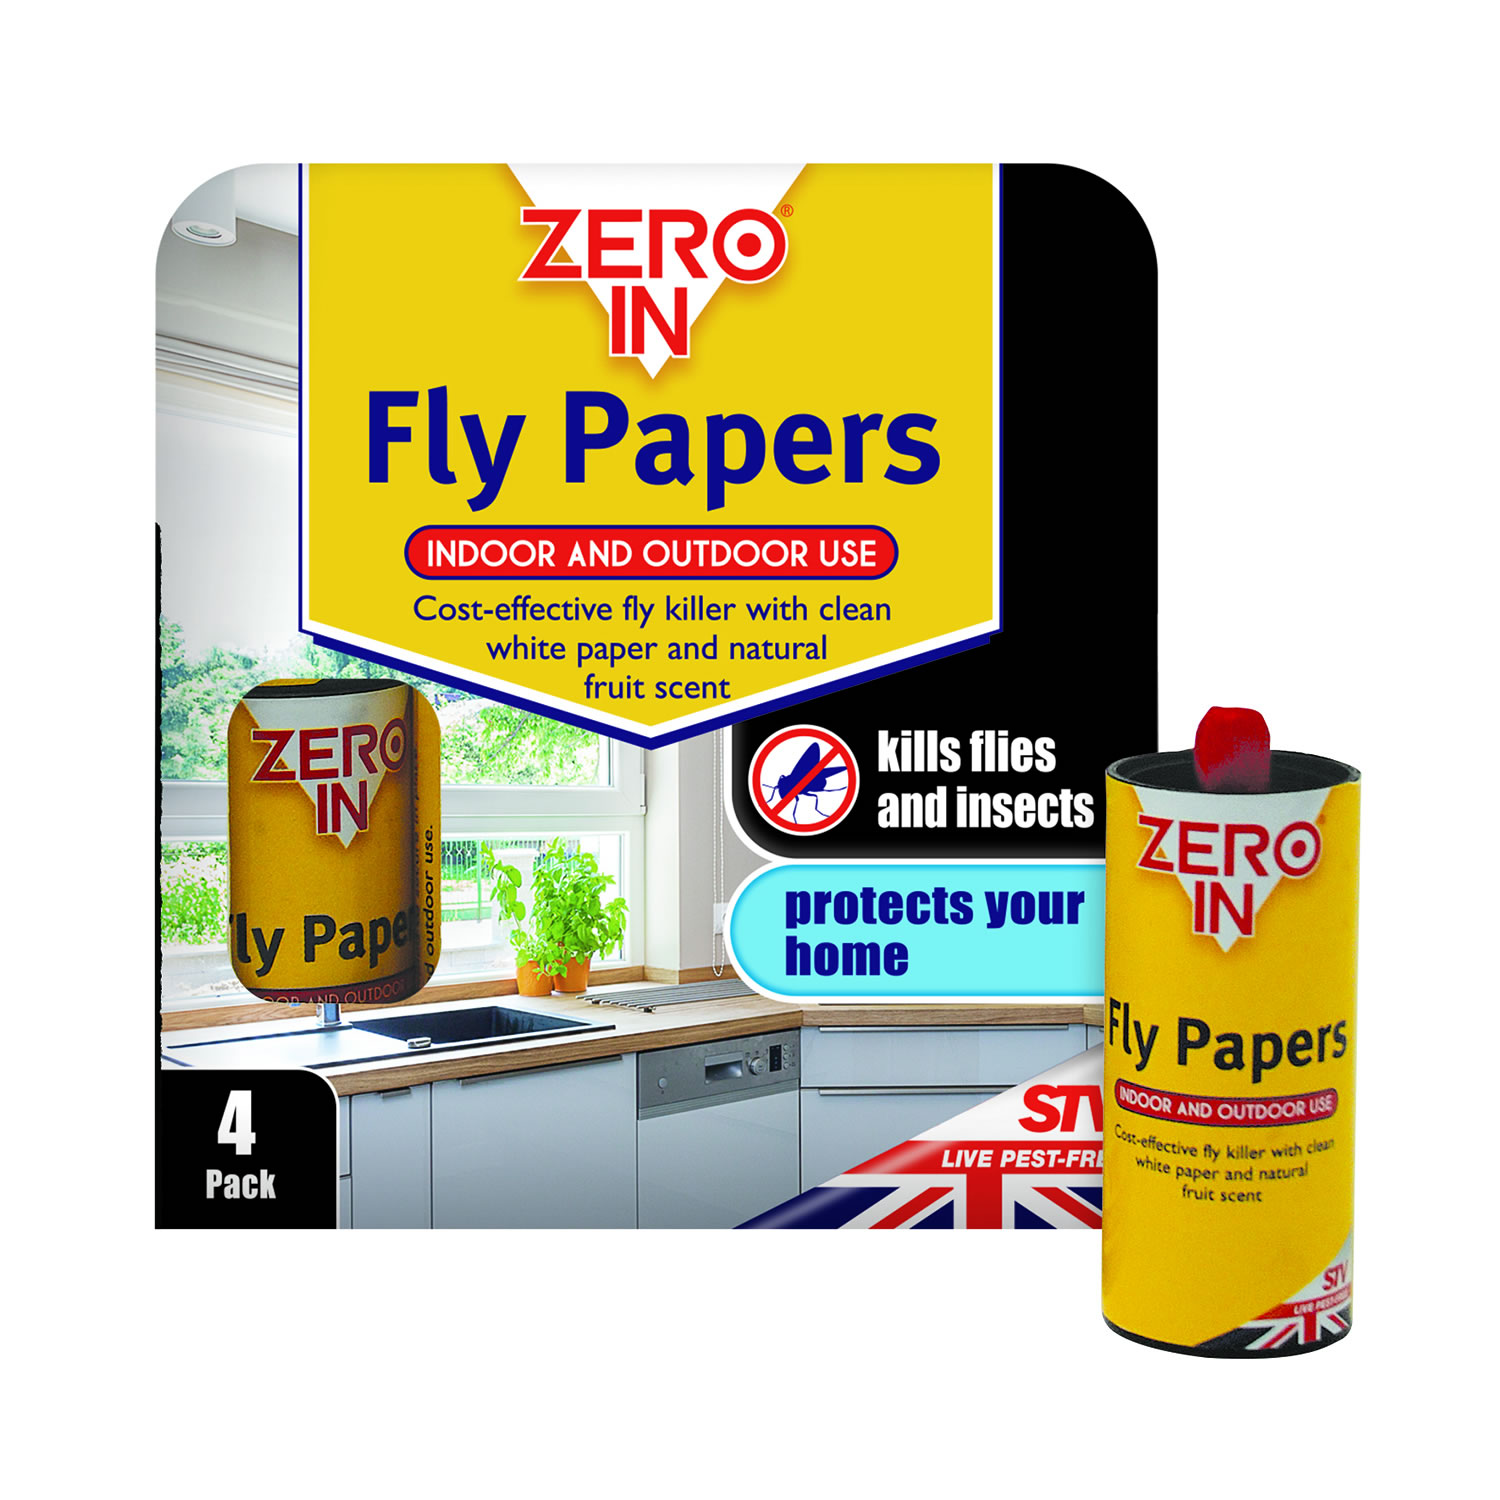 ZERO IN FLY PAPERS 4 PACK